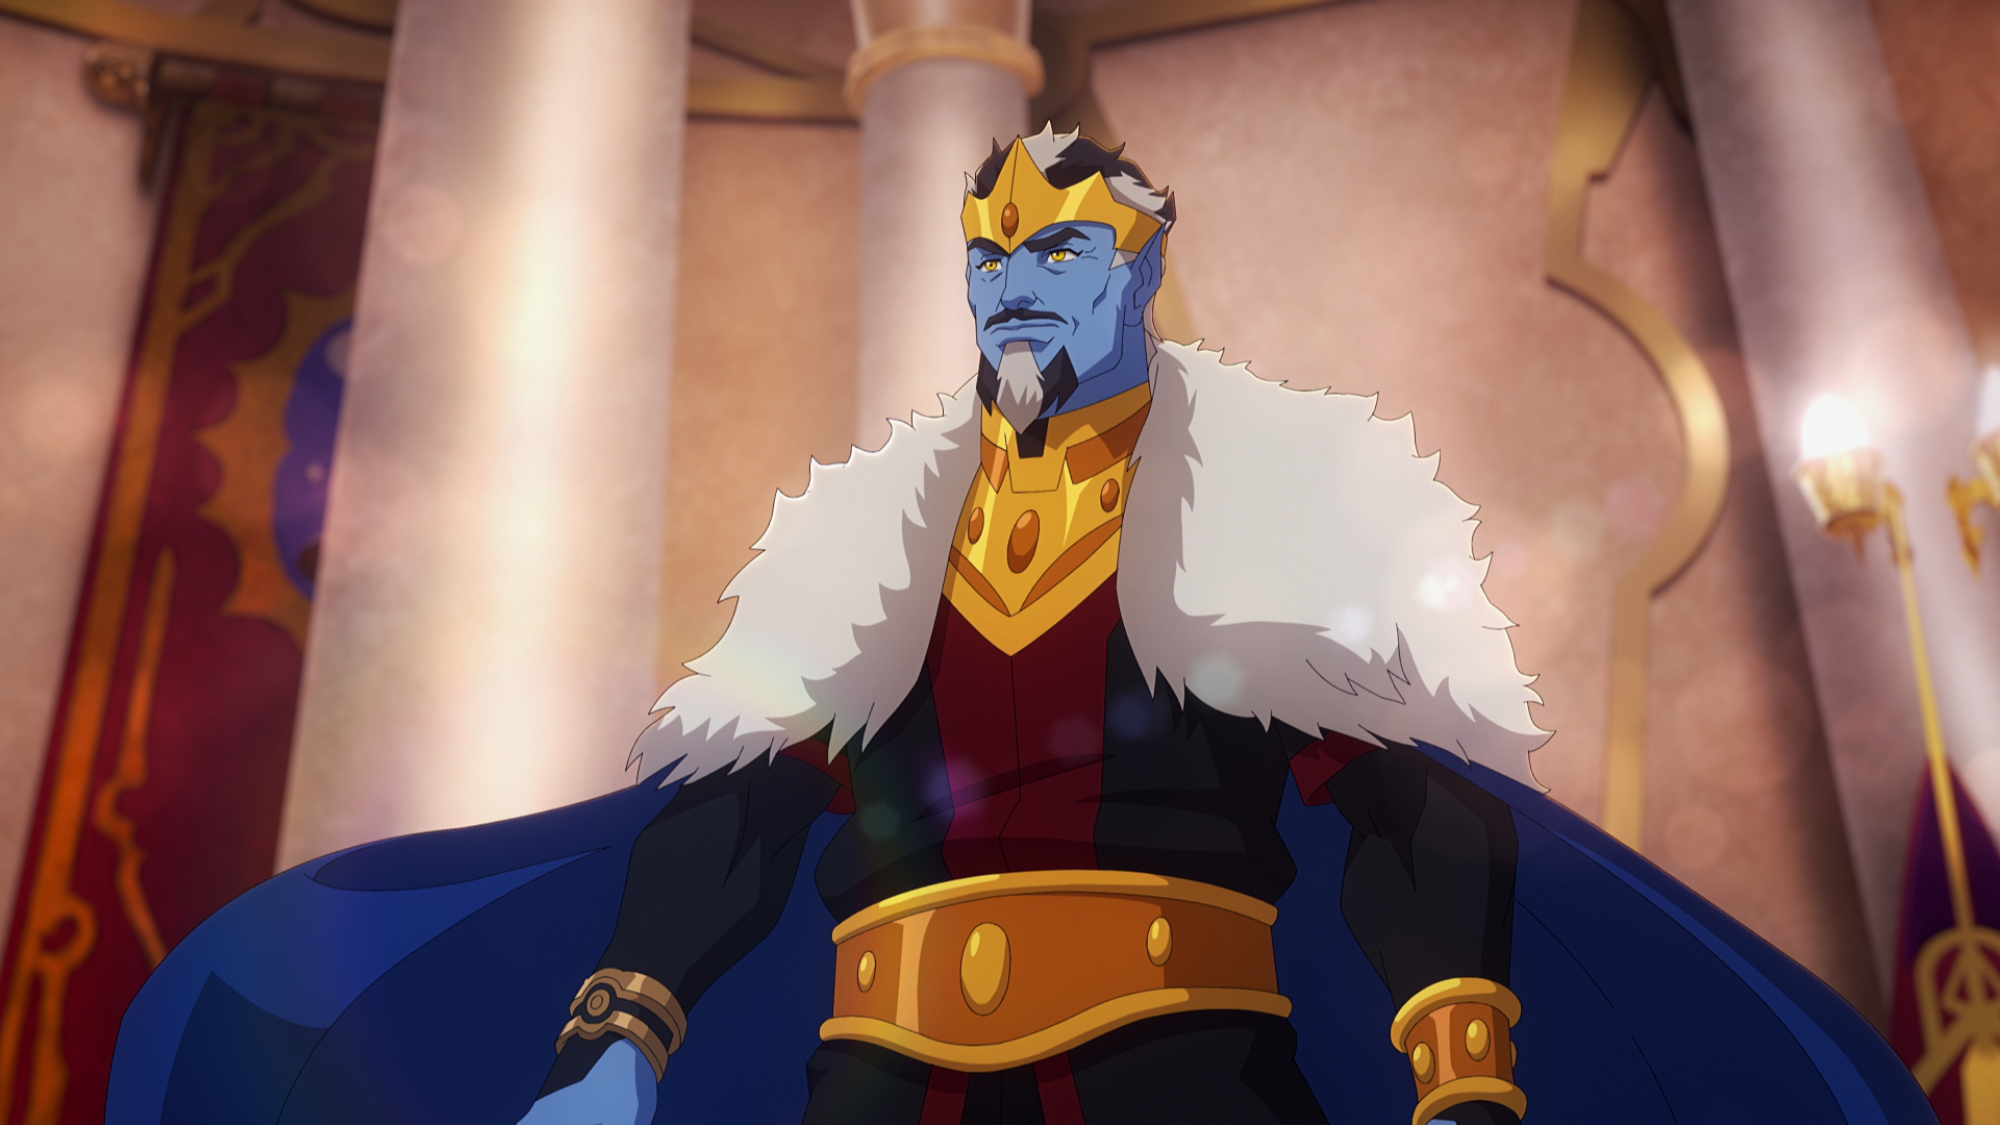 Keldor, a blue man wearing a crown and a white fur-lined cape.